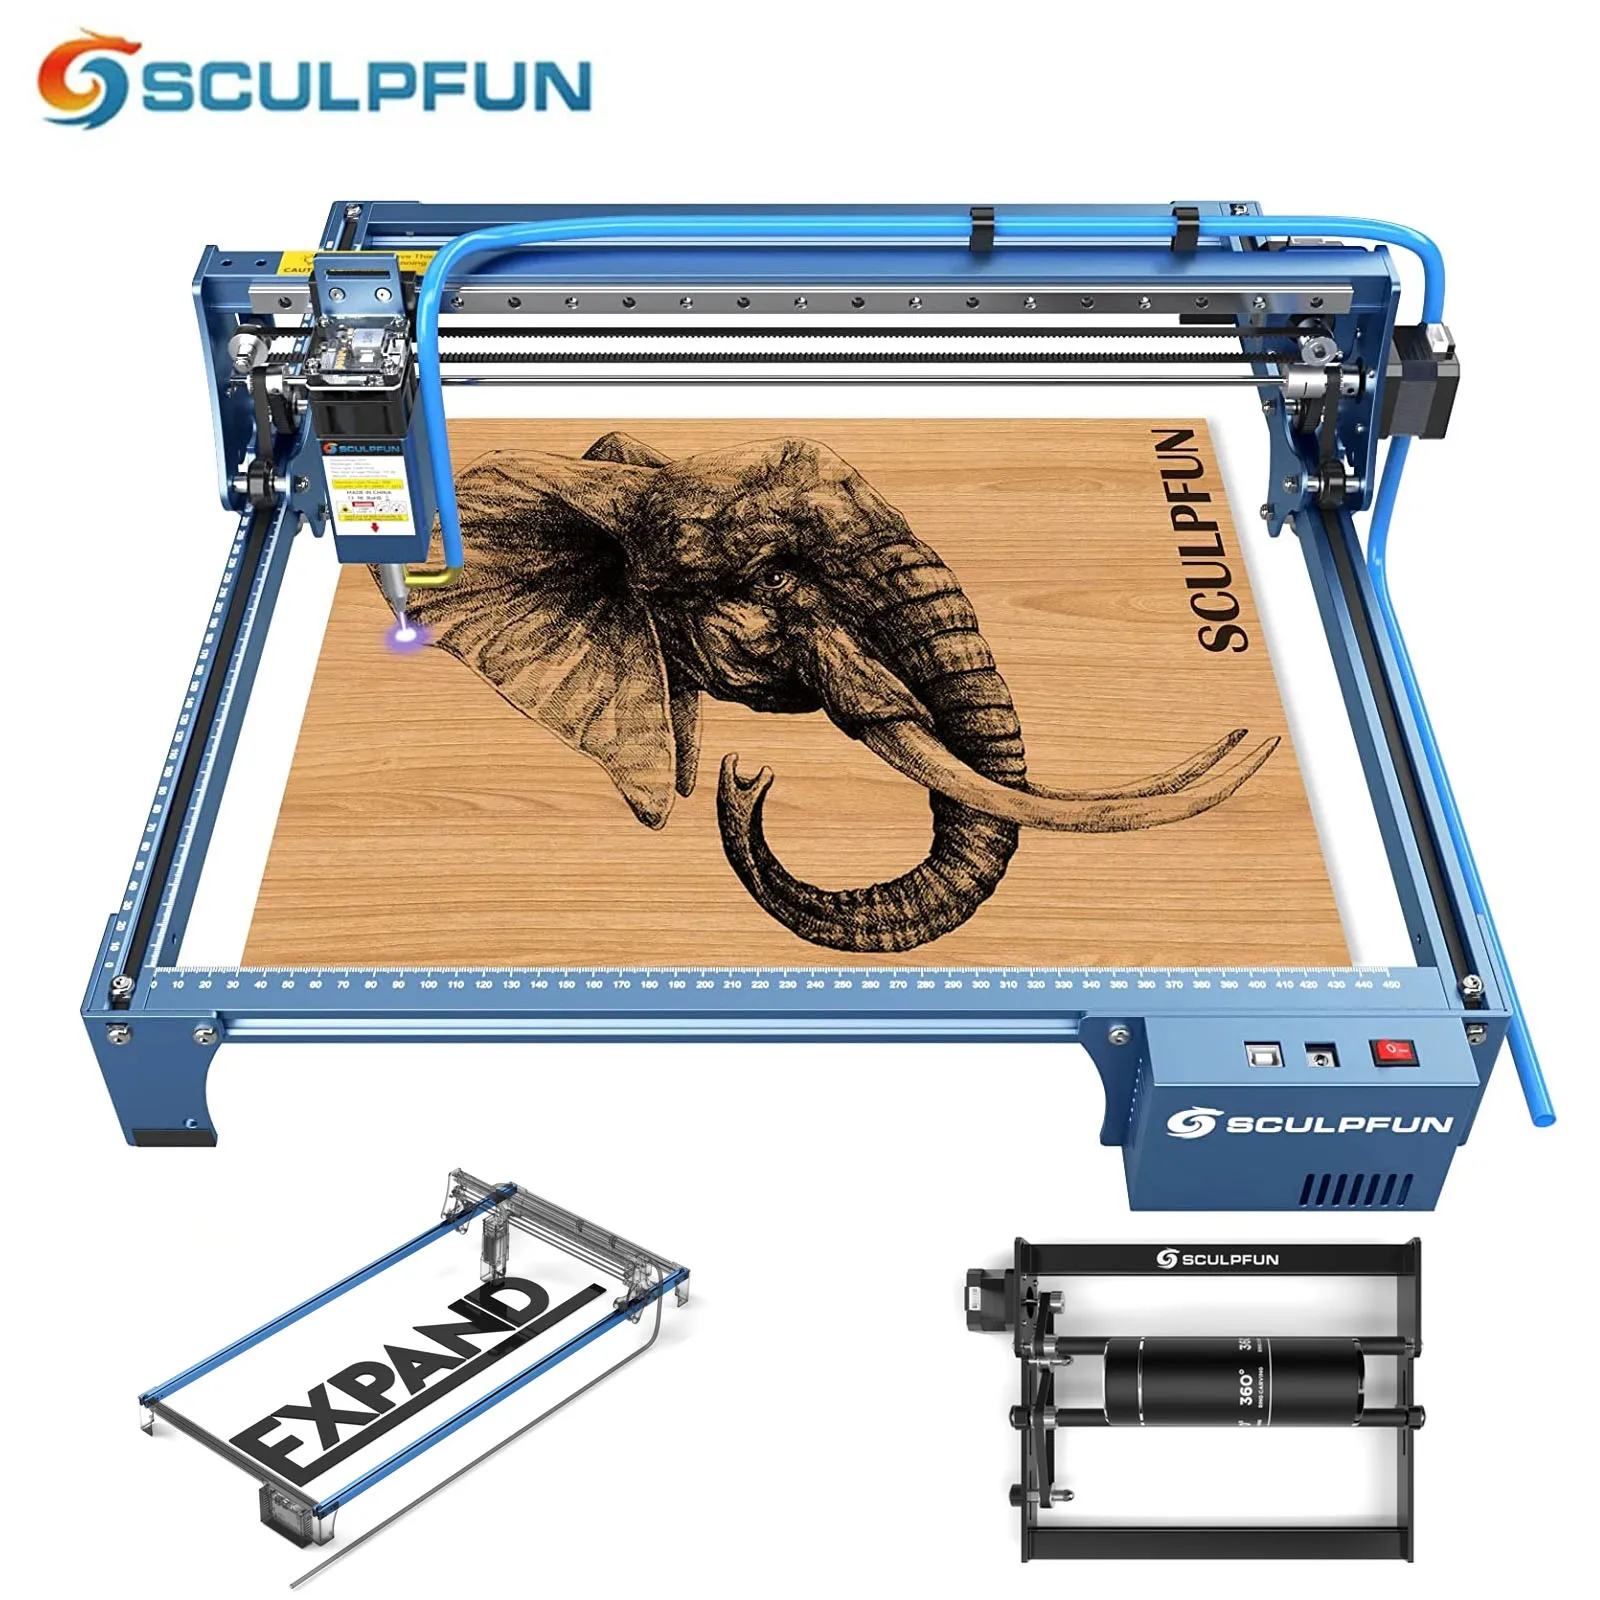 SCULPFUN S10 Laser Engraving Machine High Speed Industrial-grade 10W Laser Engraver With Extension Rid 940x410mm Working Area